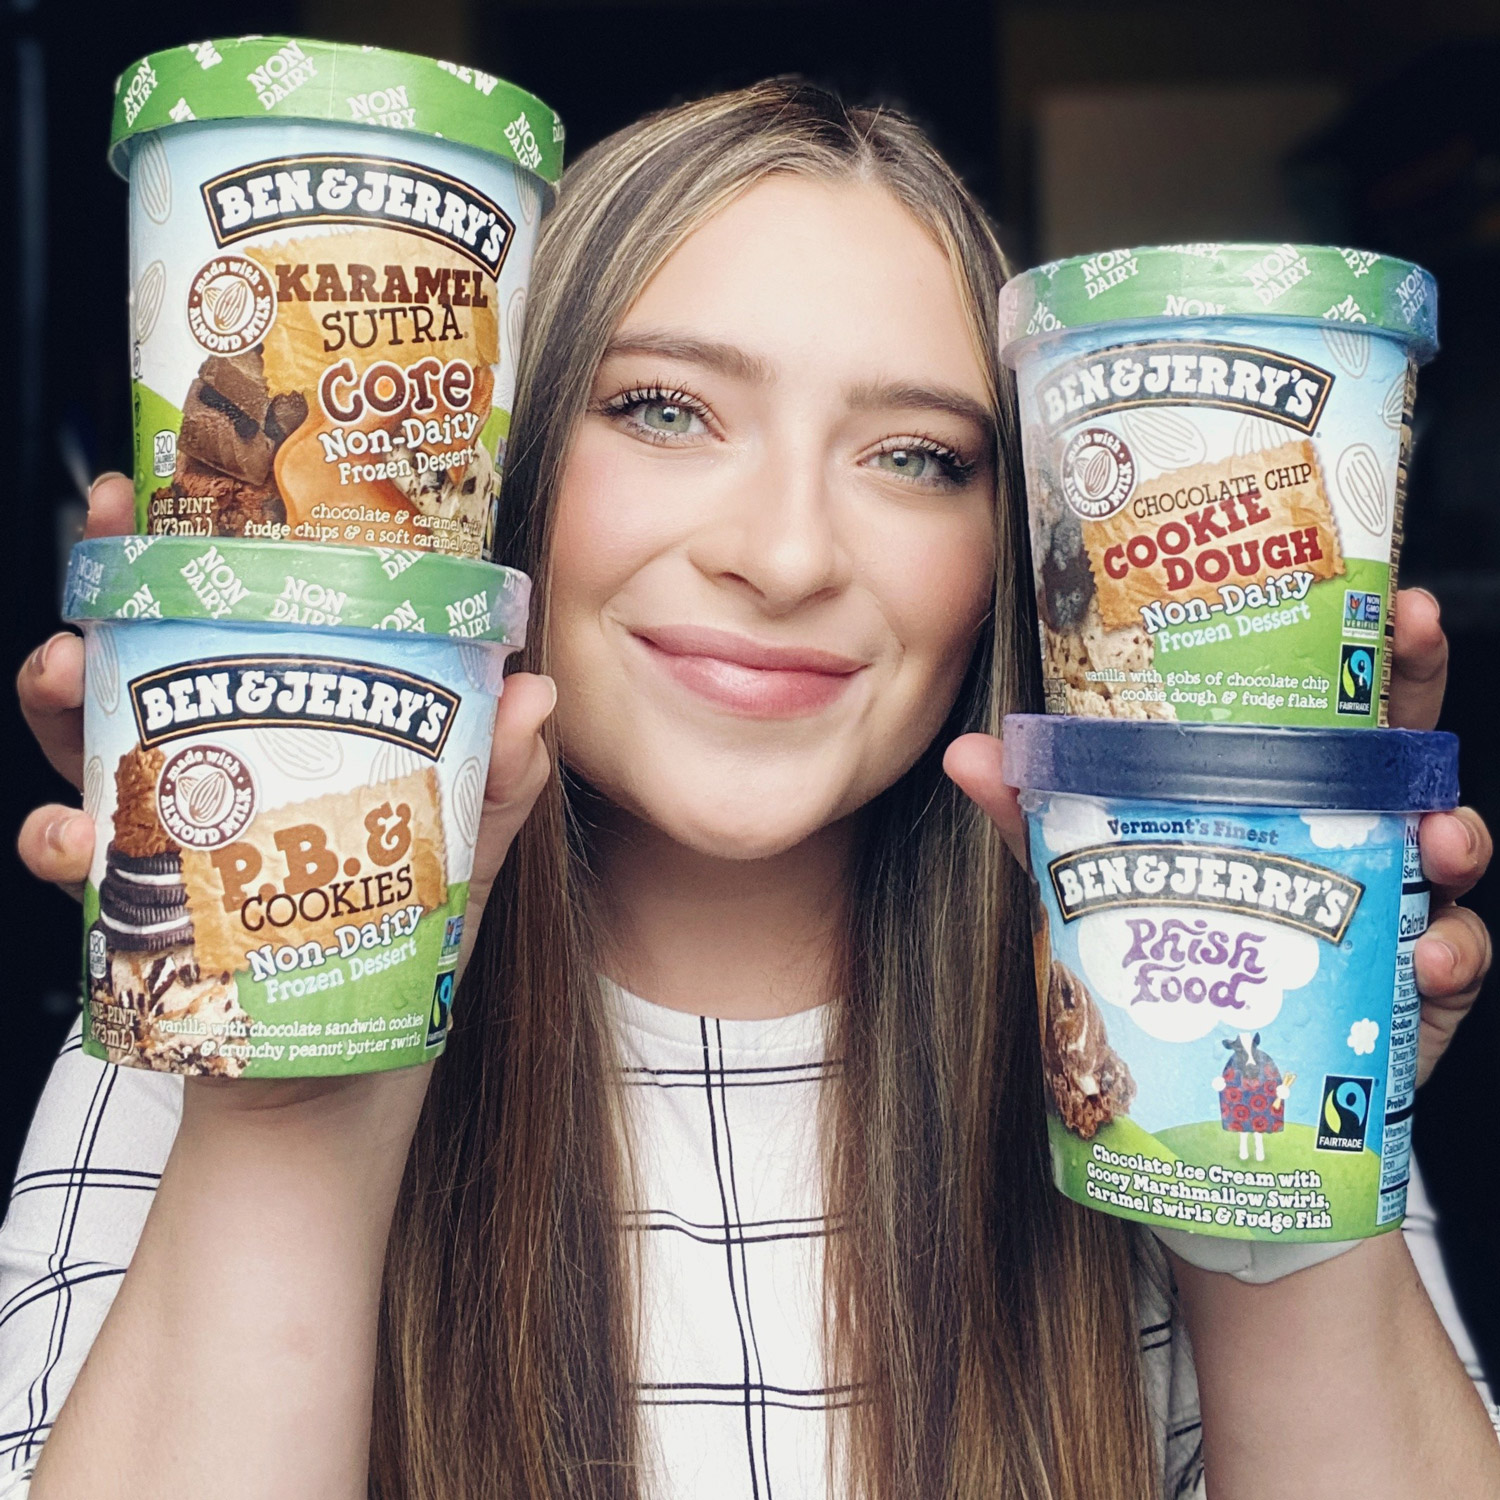 A female student holds pints of ice cream up next to her face